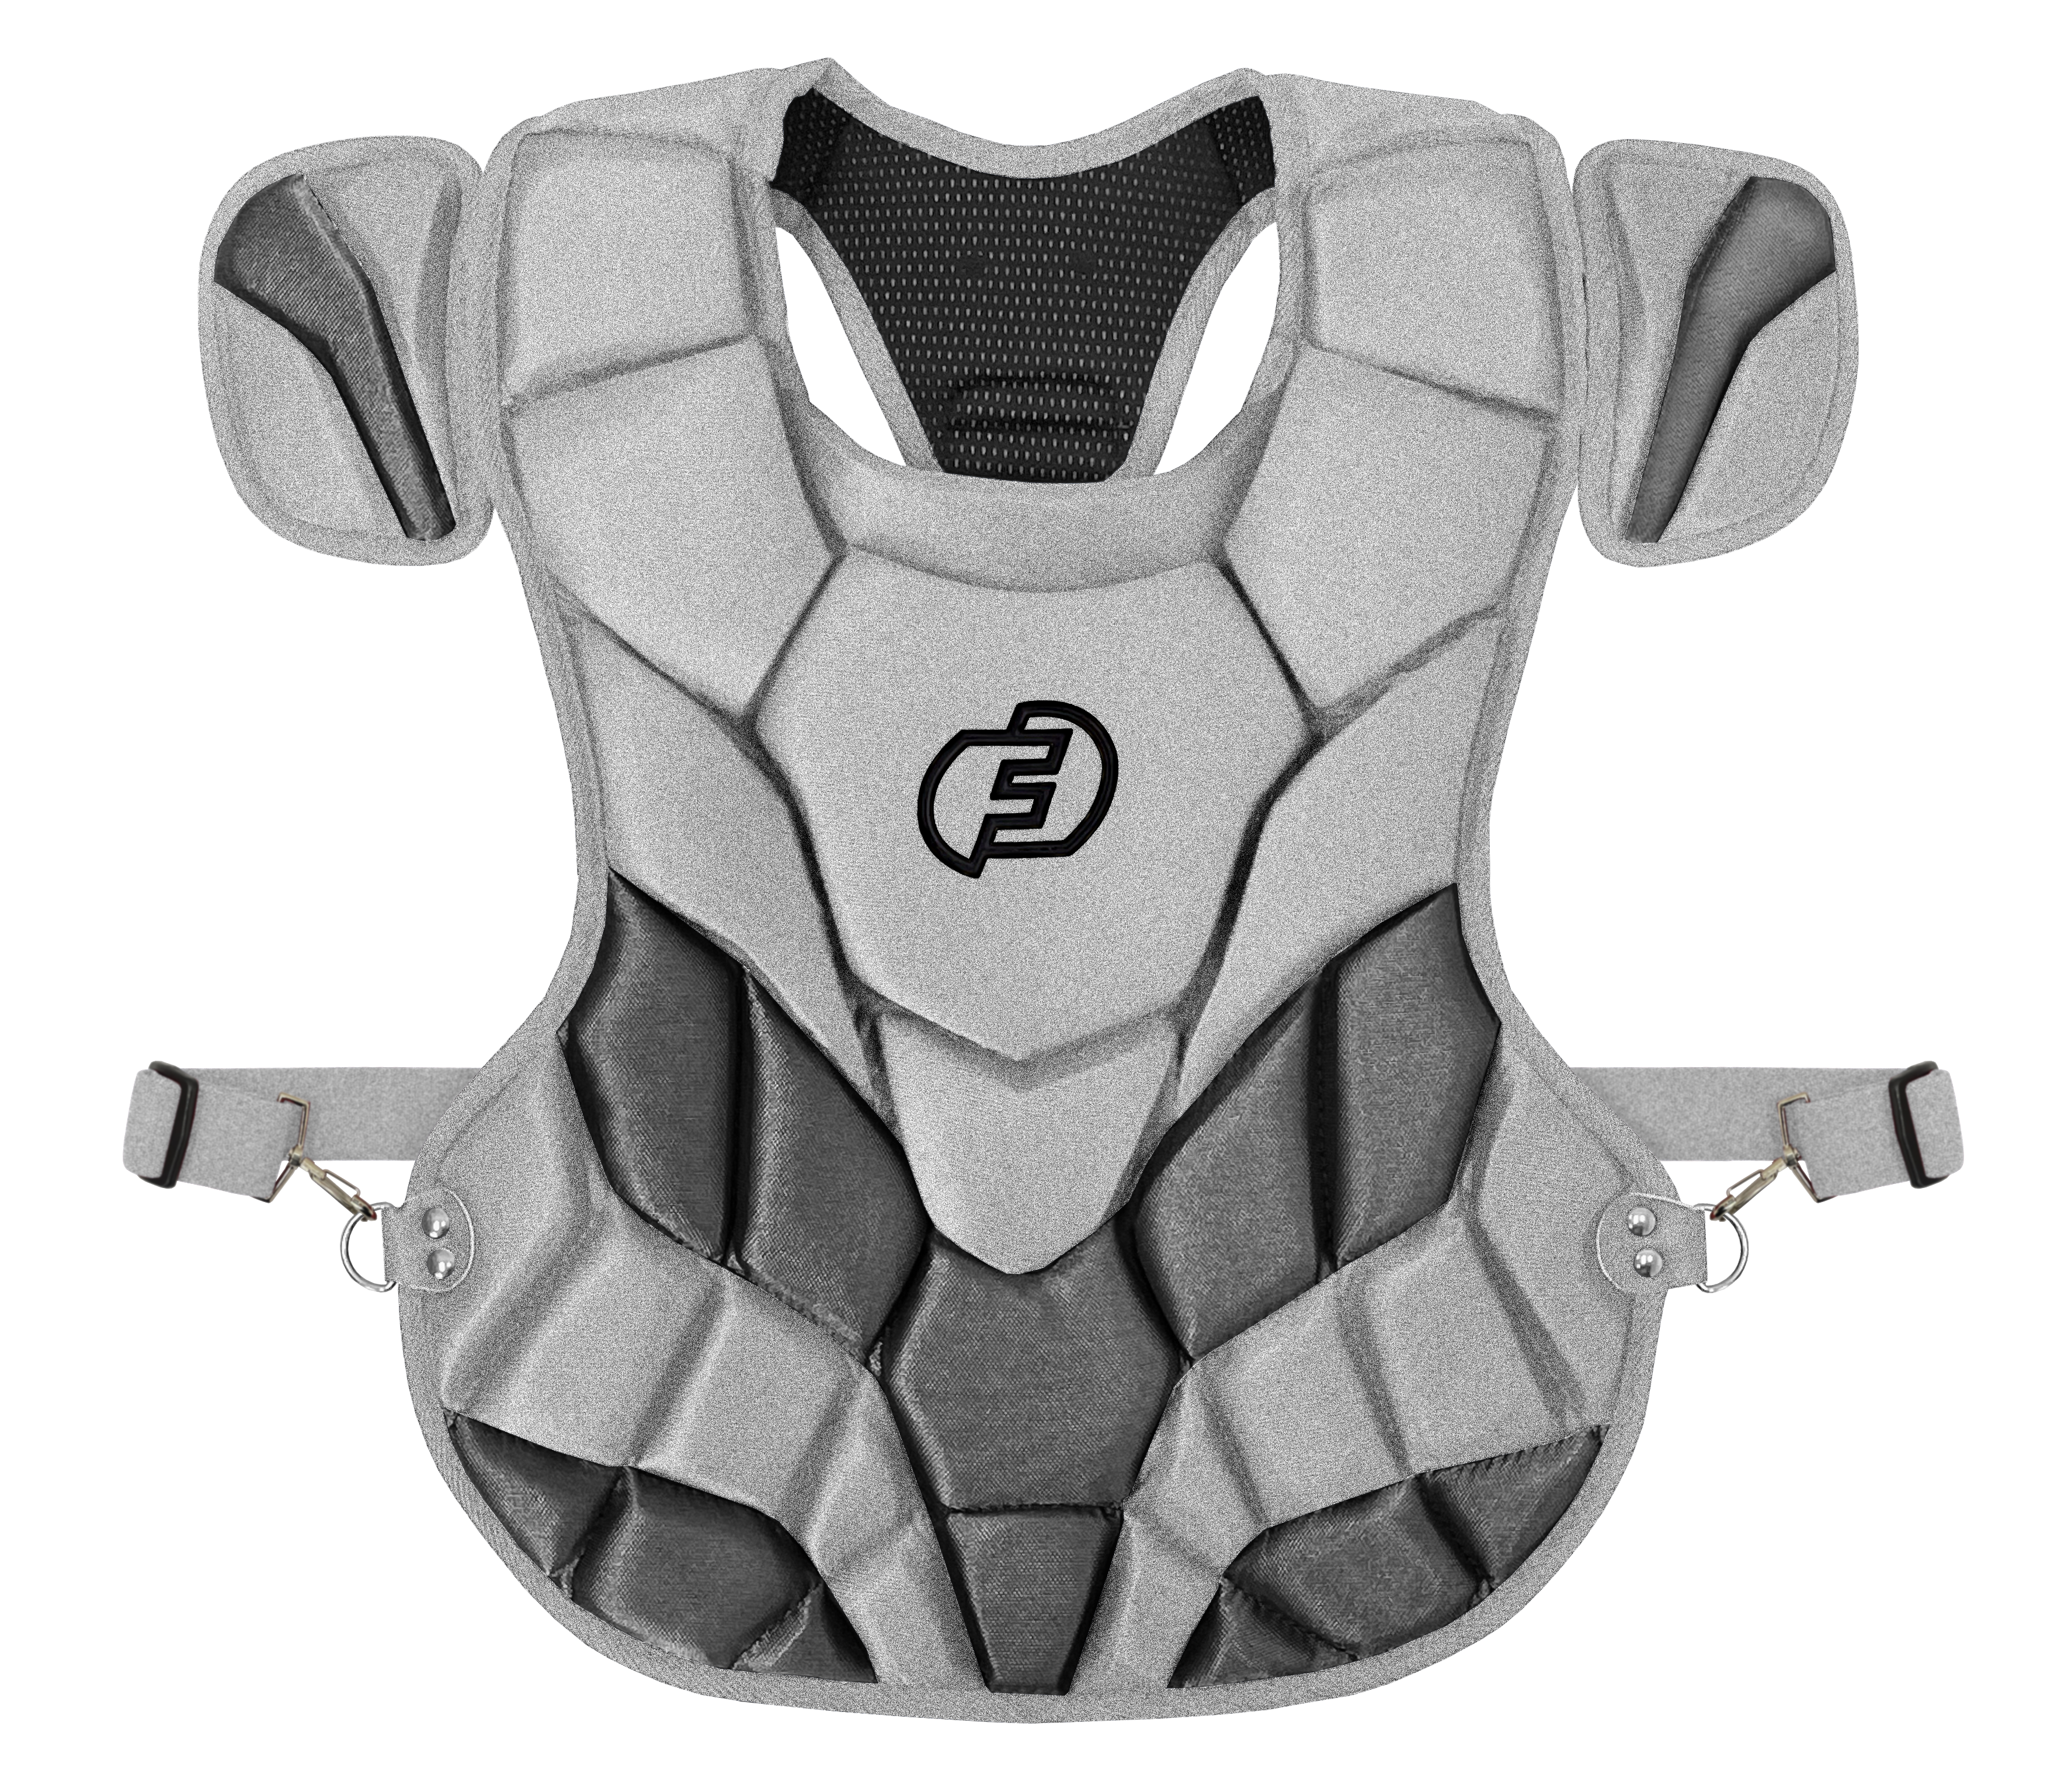 Force3 YOUTH |CHEST PROTECTOR WITH DUPONT™ KEVLAR® | SEI CERTIFIED TO MEET NOCSAE STANDARD